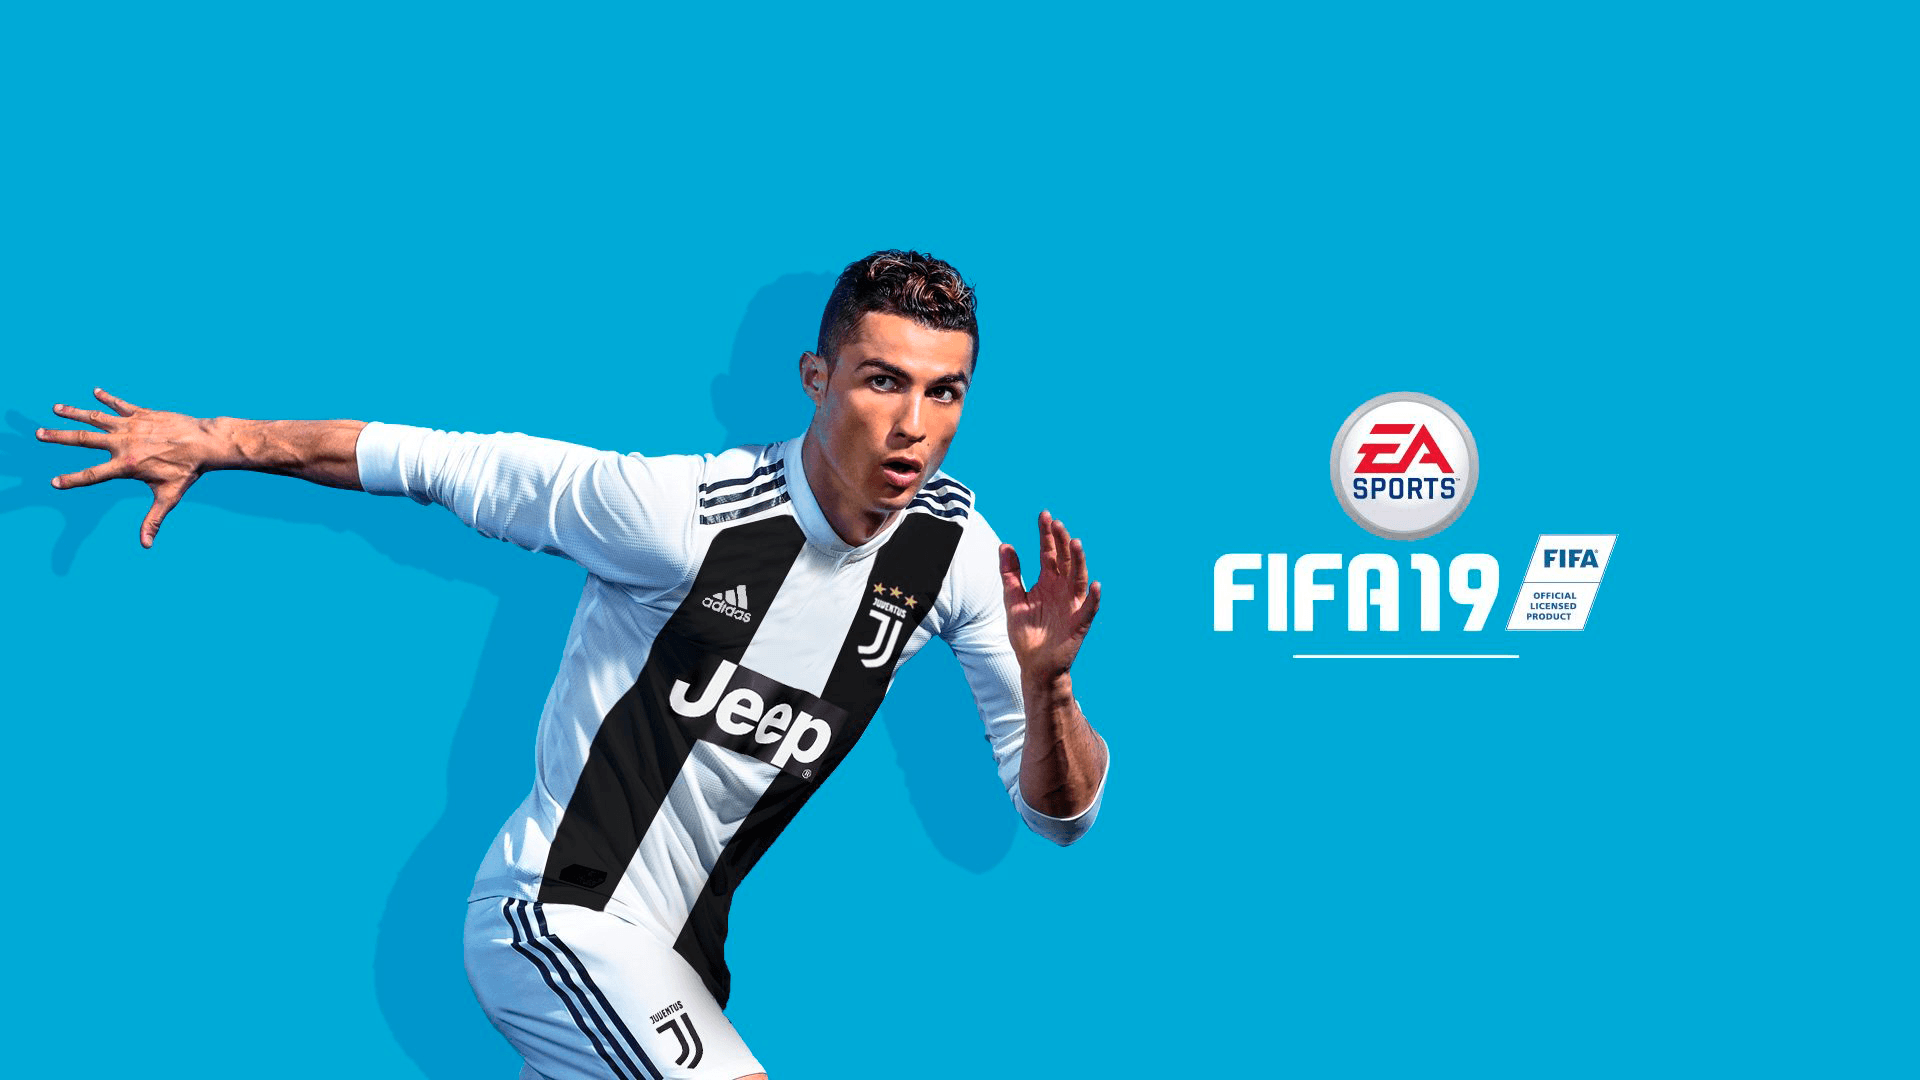 FIFA 19 ICONS List: All the ICONS in Ultimate Team Revealed